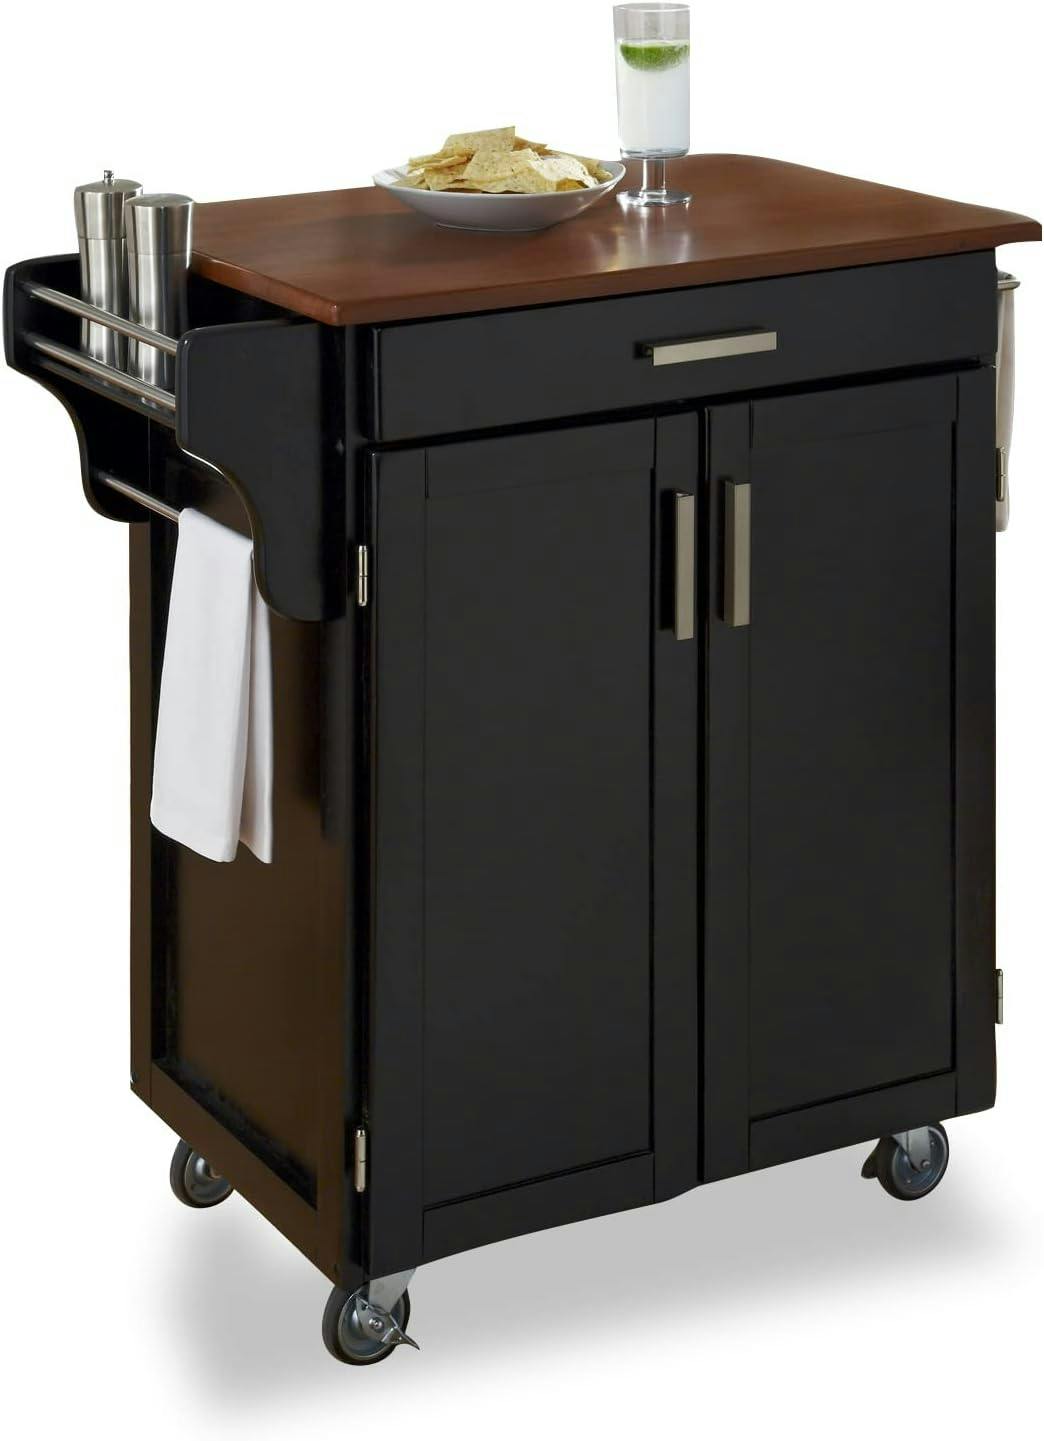 Granite Top Multi-Utility Kitchen Cart with Spice Rack and Storage